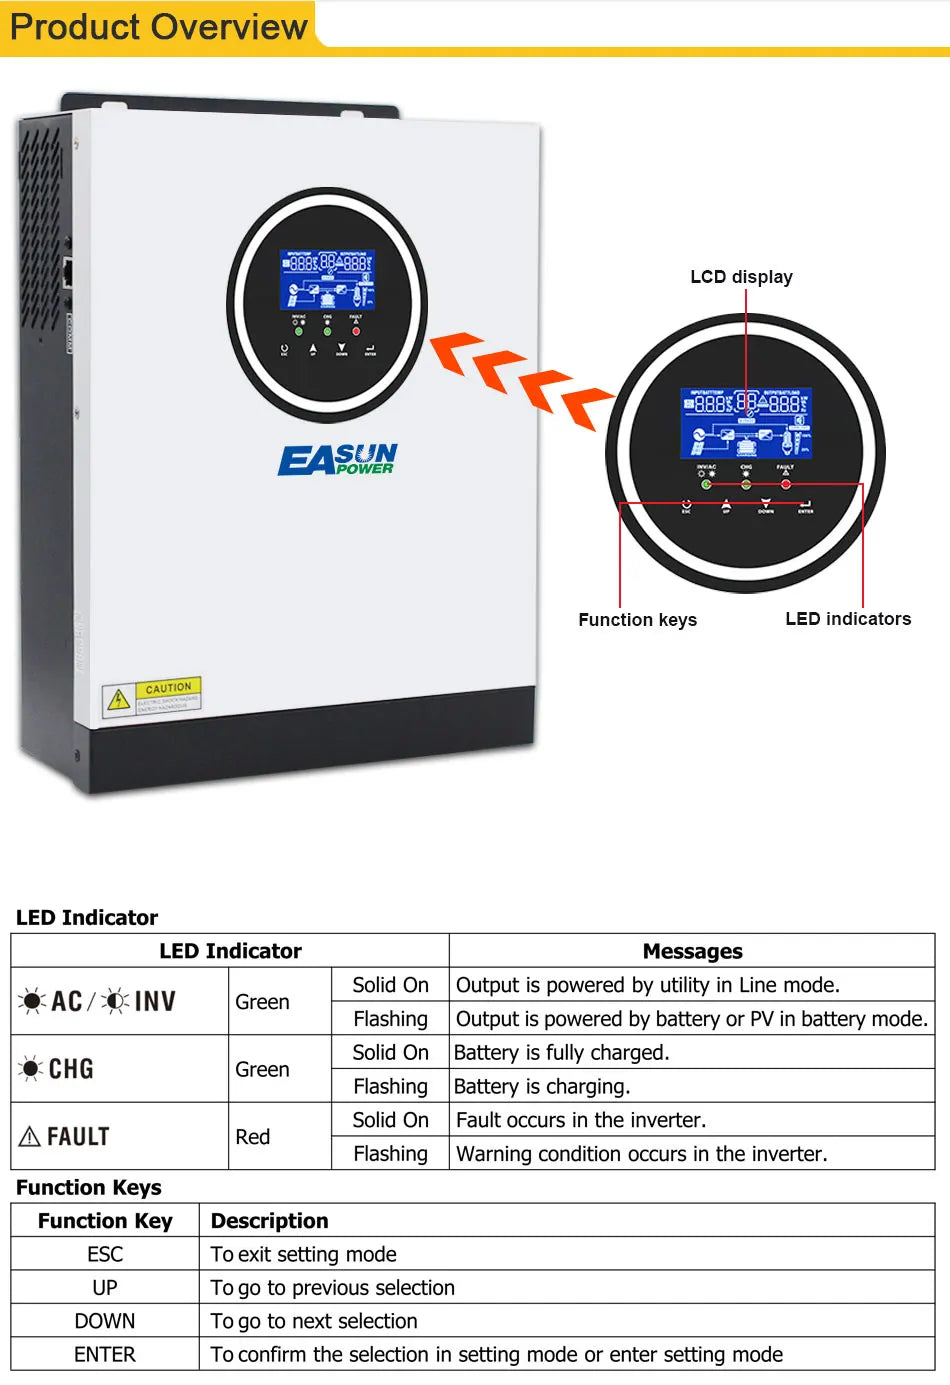 Easun Power 3200VA 3000W Solar Inverter, Solar inverter with built-in MPPT controller, supports up to 450VDC and outputs 230VAC.